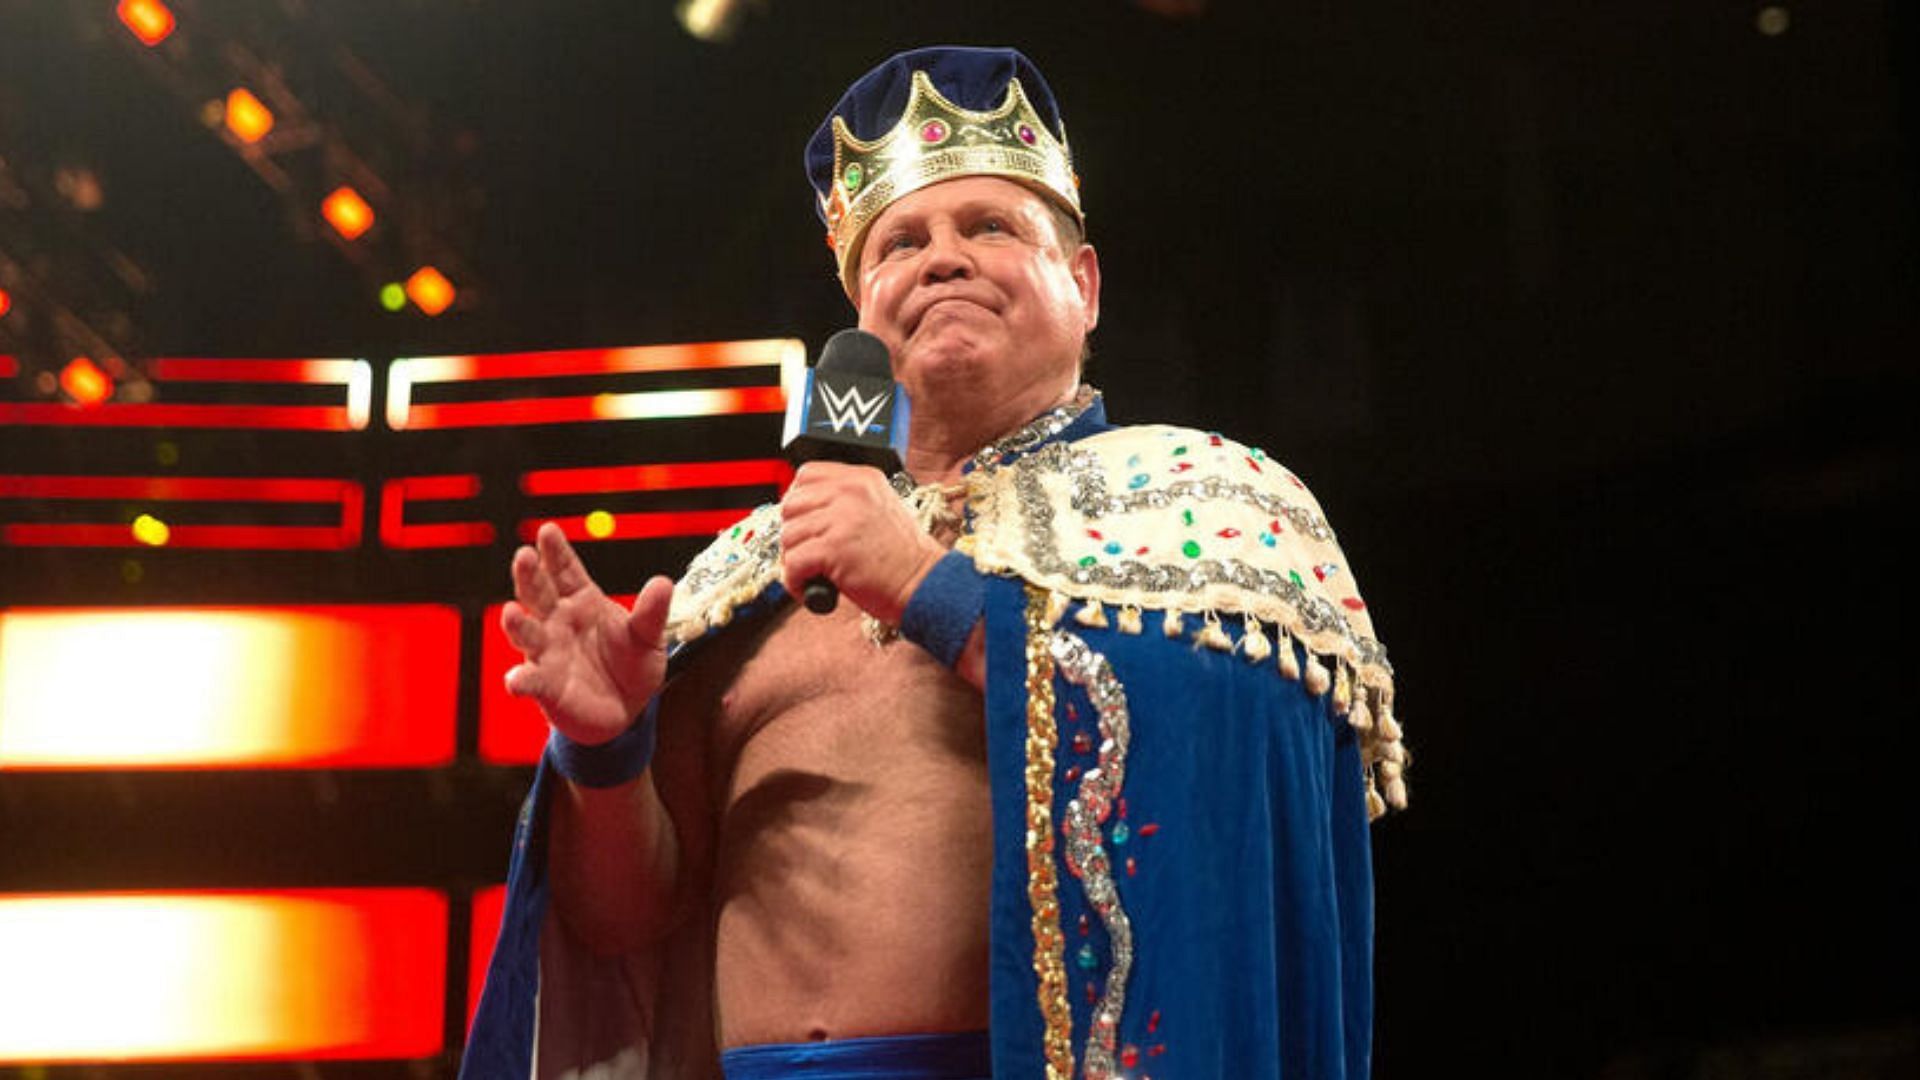 Lawler is a legend of the professional wrestling industry.